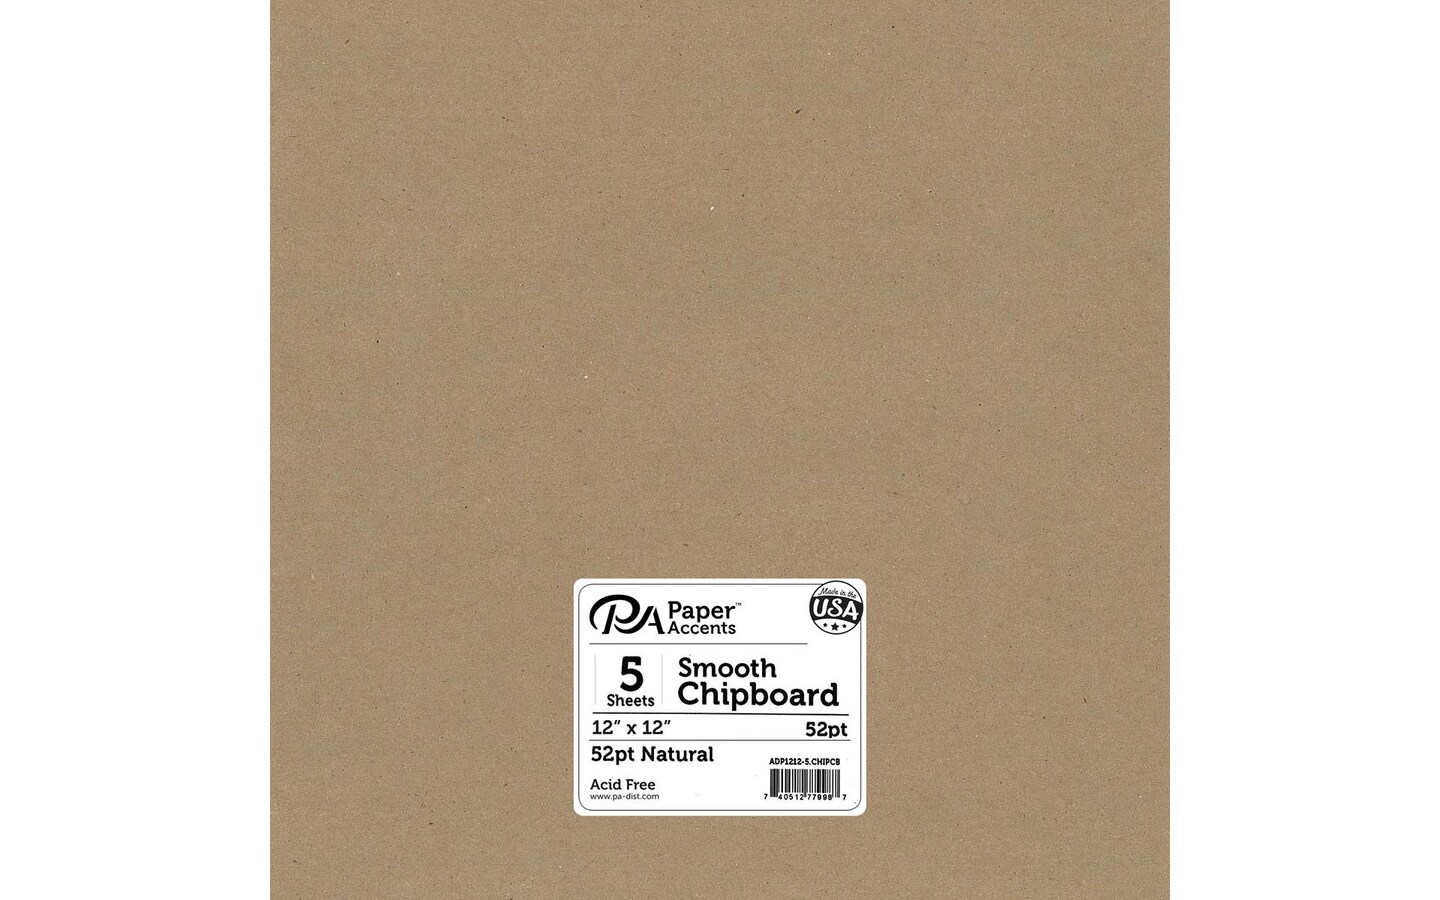 PA Paper™ Accents Natural 8.5 x 11 10pt. Lite Chipboard, 35 Sheets